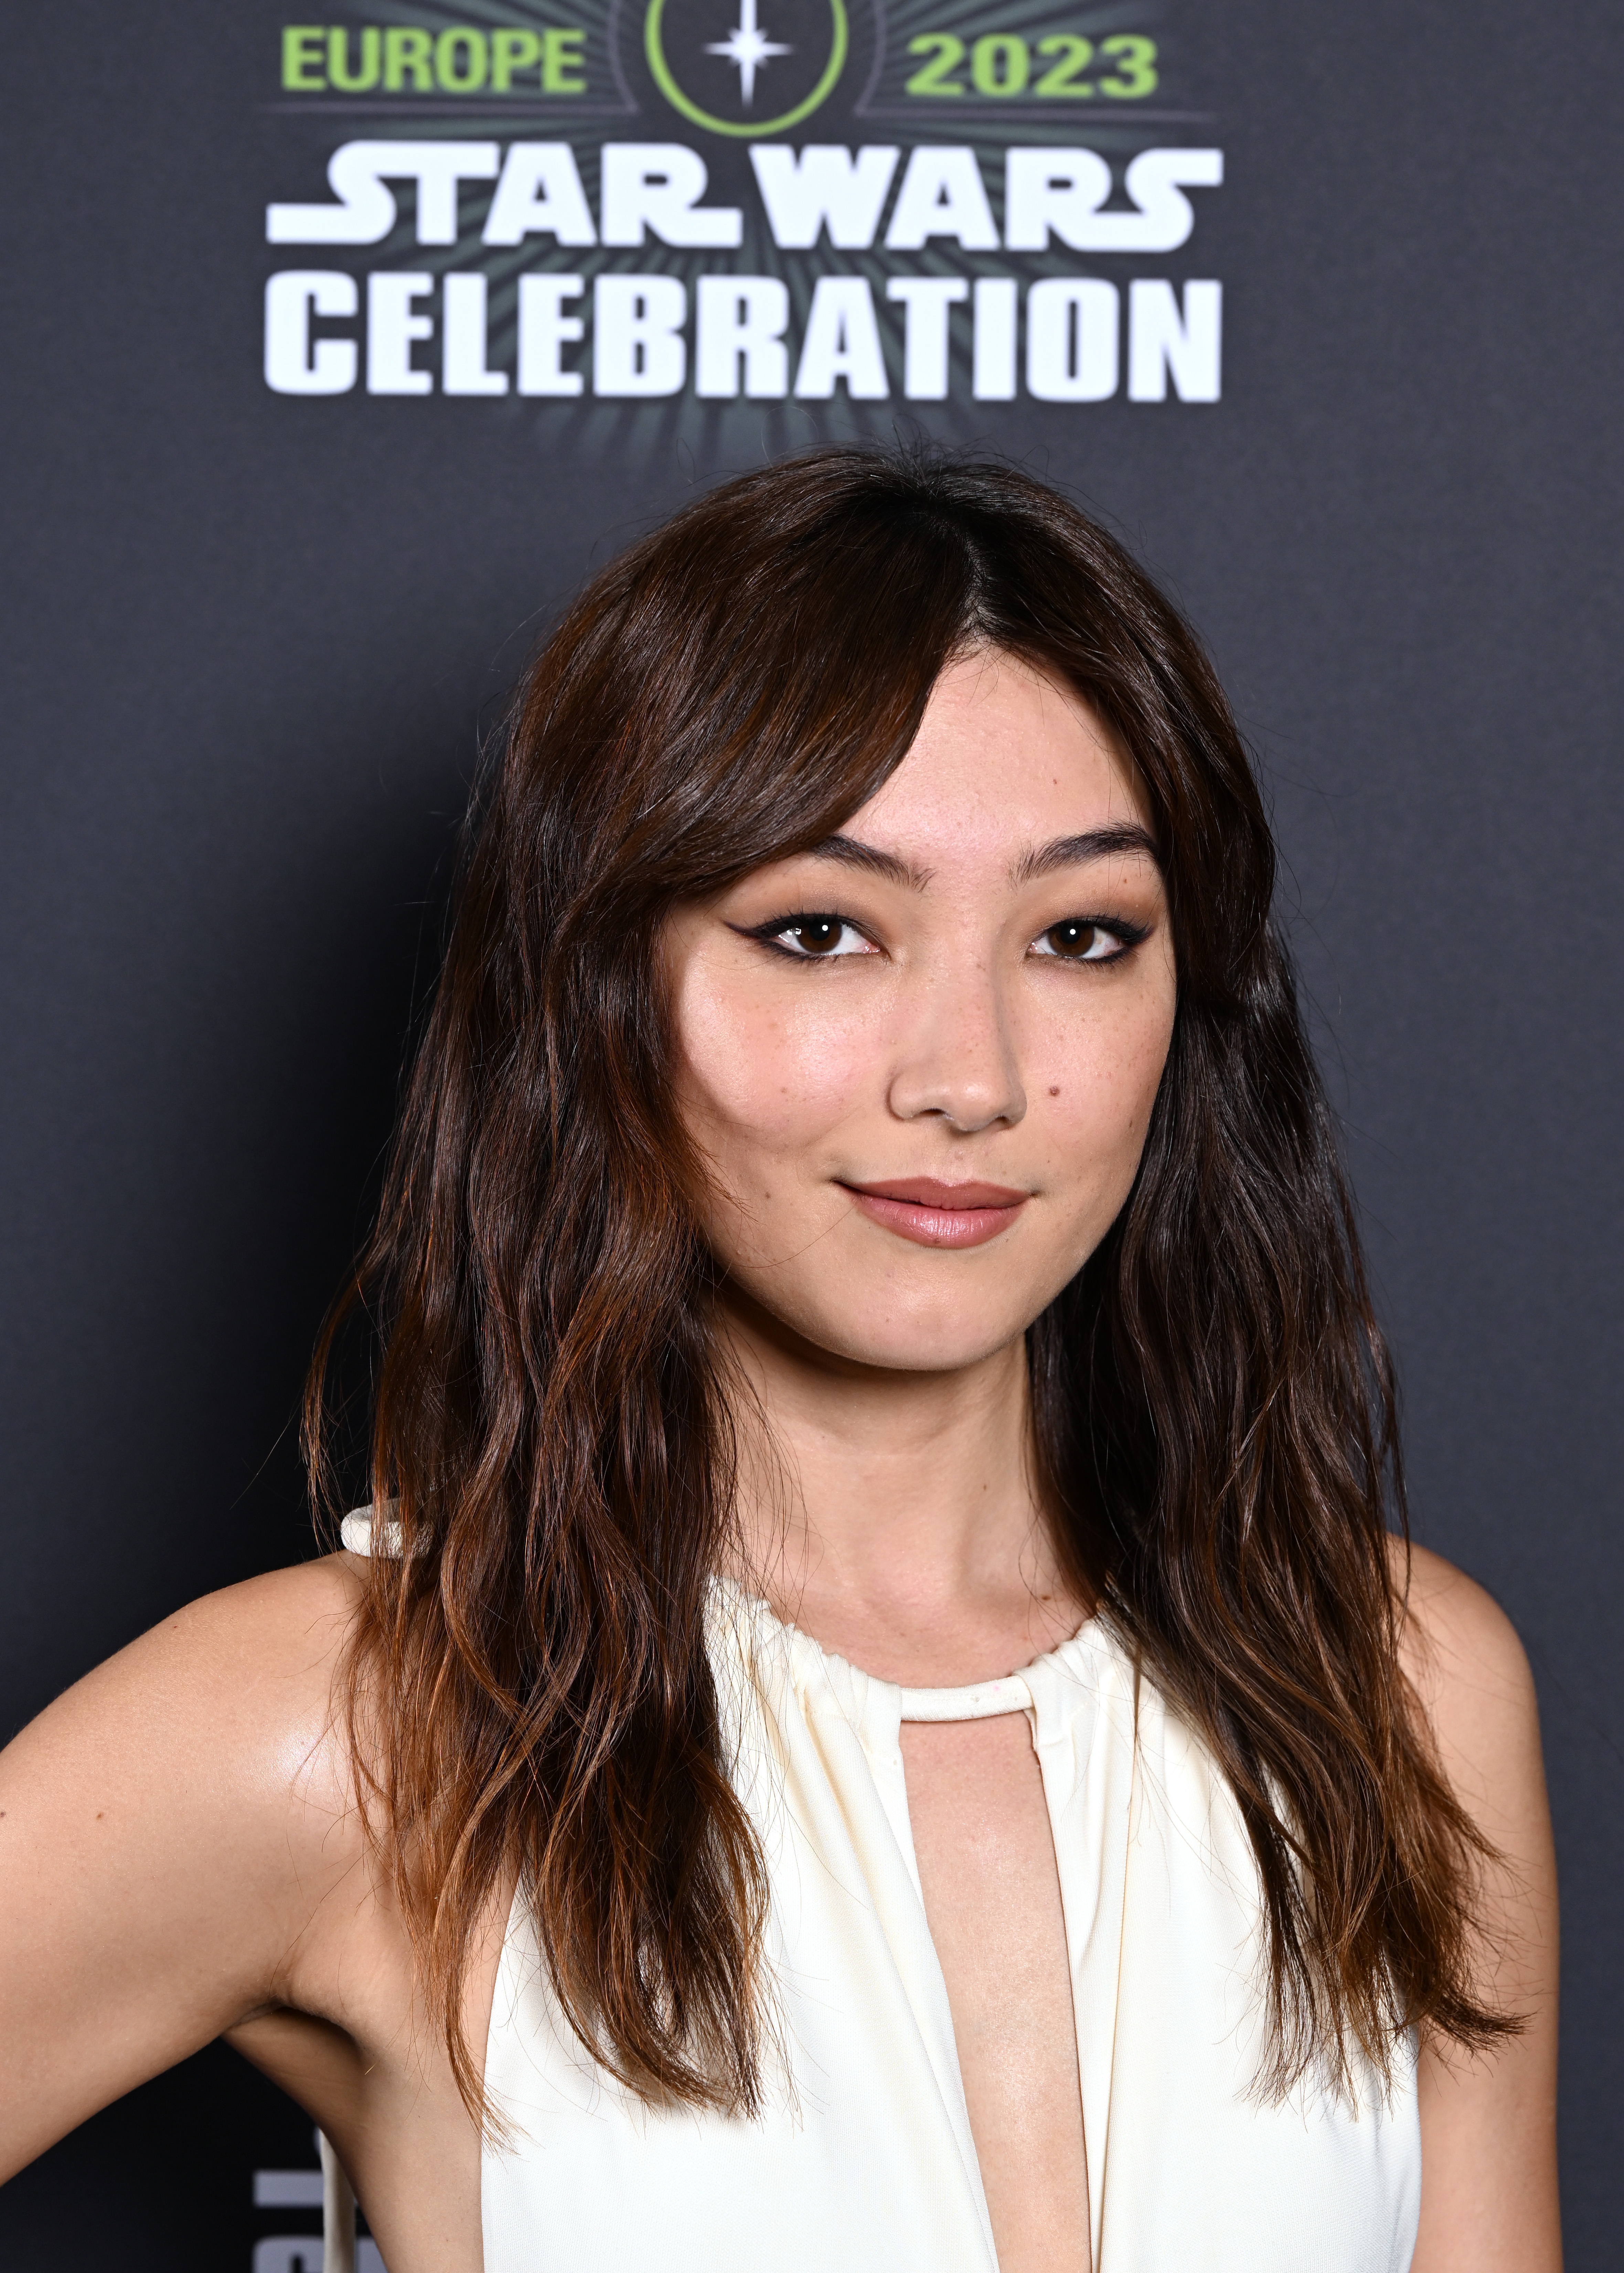 Natasha Liu Bordizzo during the Start Wars Celebration 2023 in London at ExCel on April 8, 2023, in London, England. | Source: Getty Images